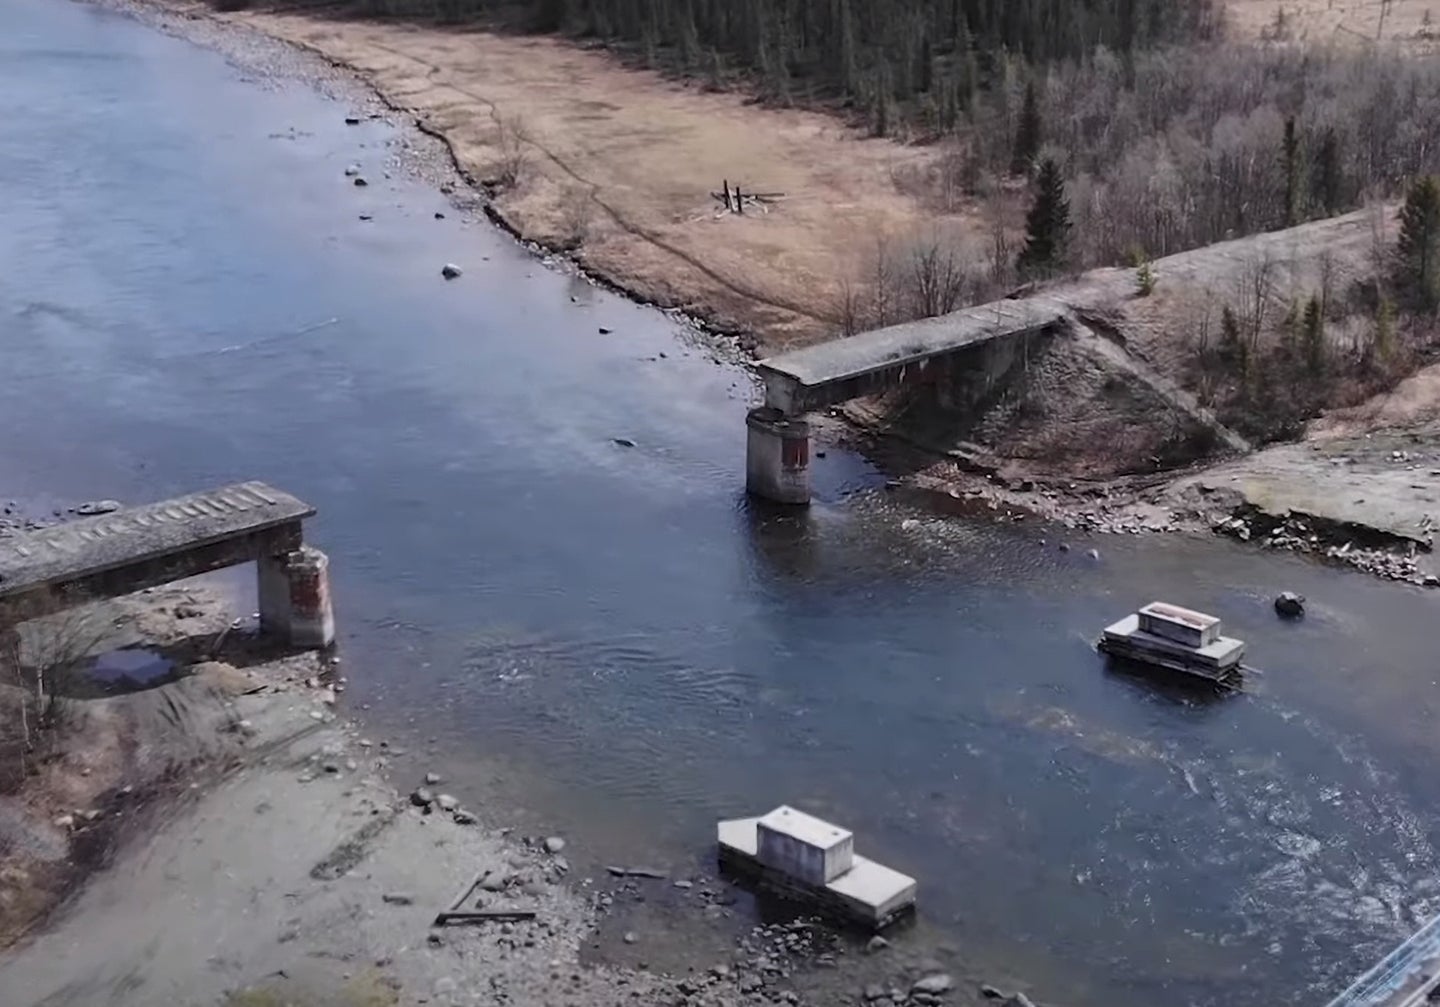 Crafty Russian Thieves Steal Entire Bridge Without Anyone Noticing for Months